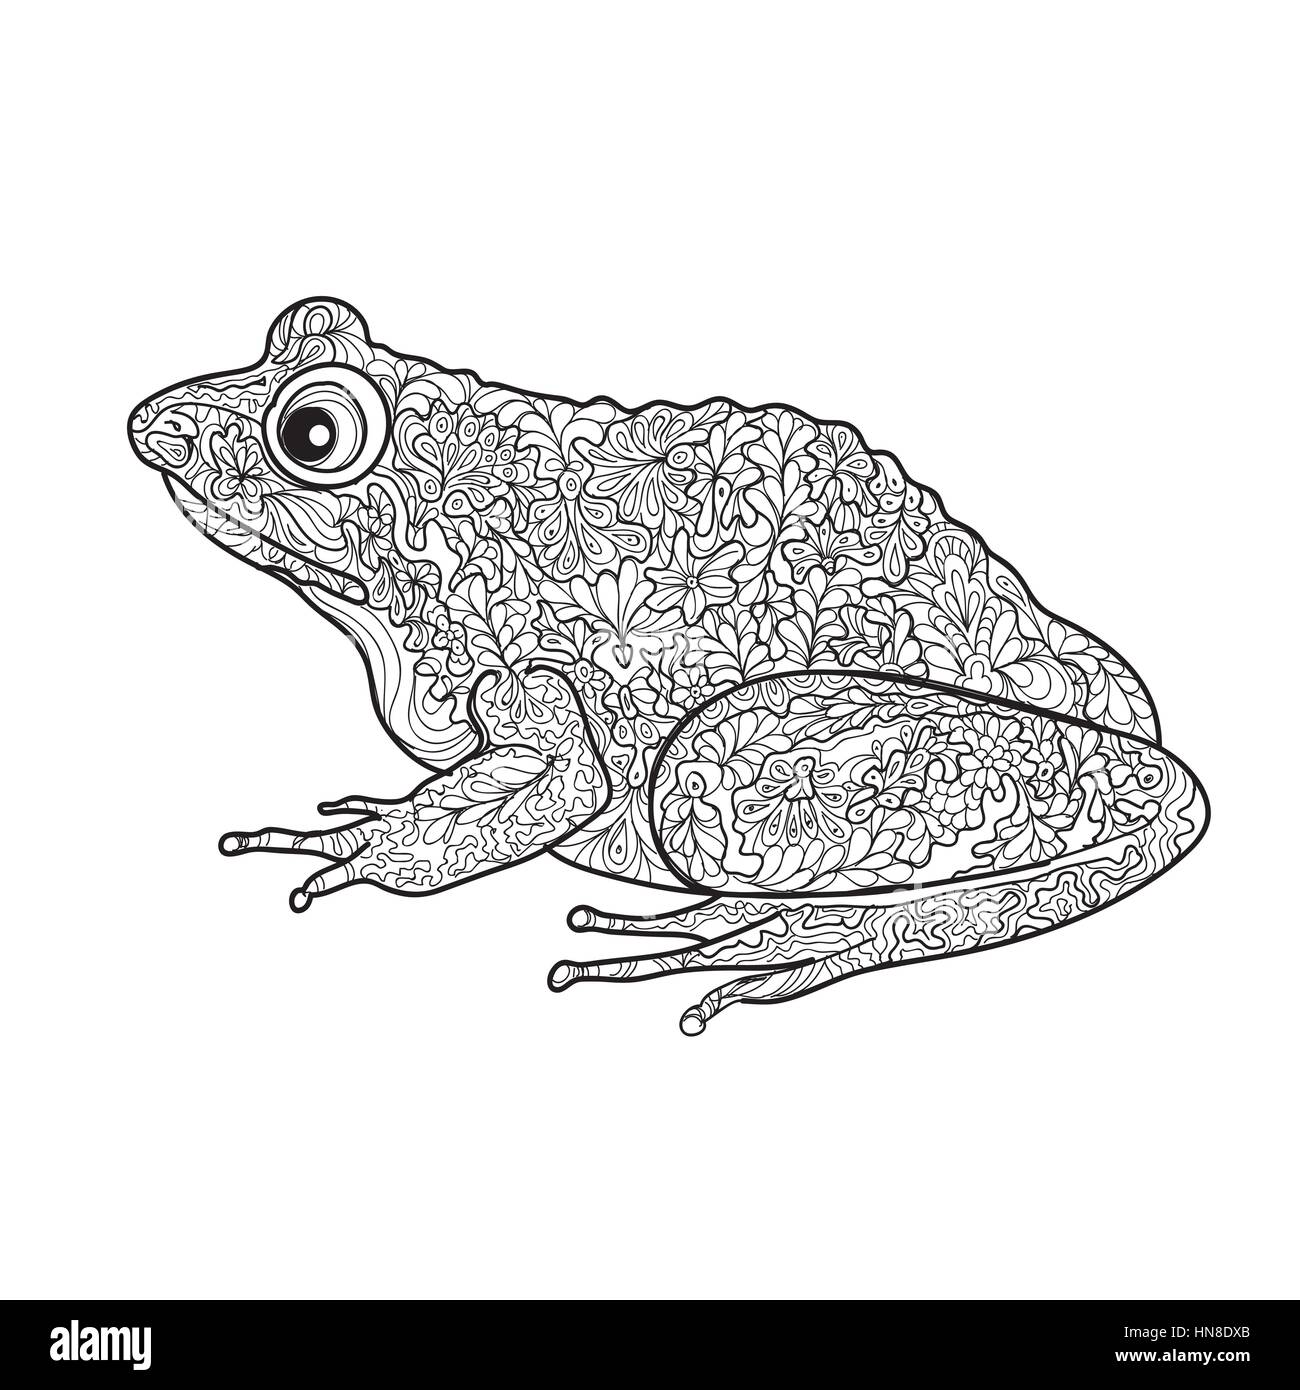 Frog isolated. Black and white ornamental doodle frog illustration with zentangle decorative ornament Stock Vector